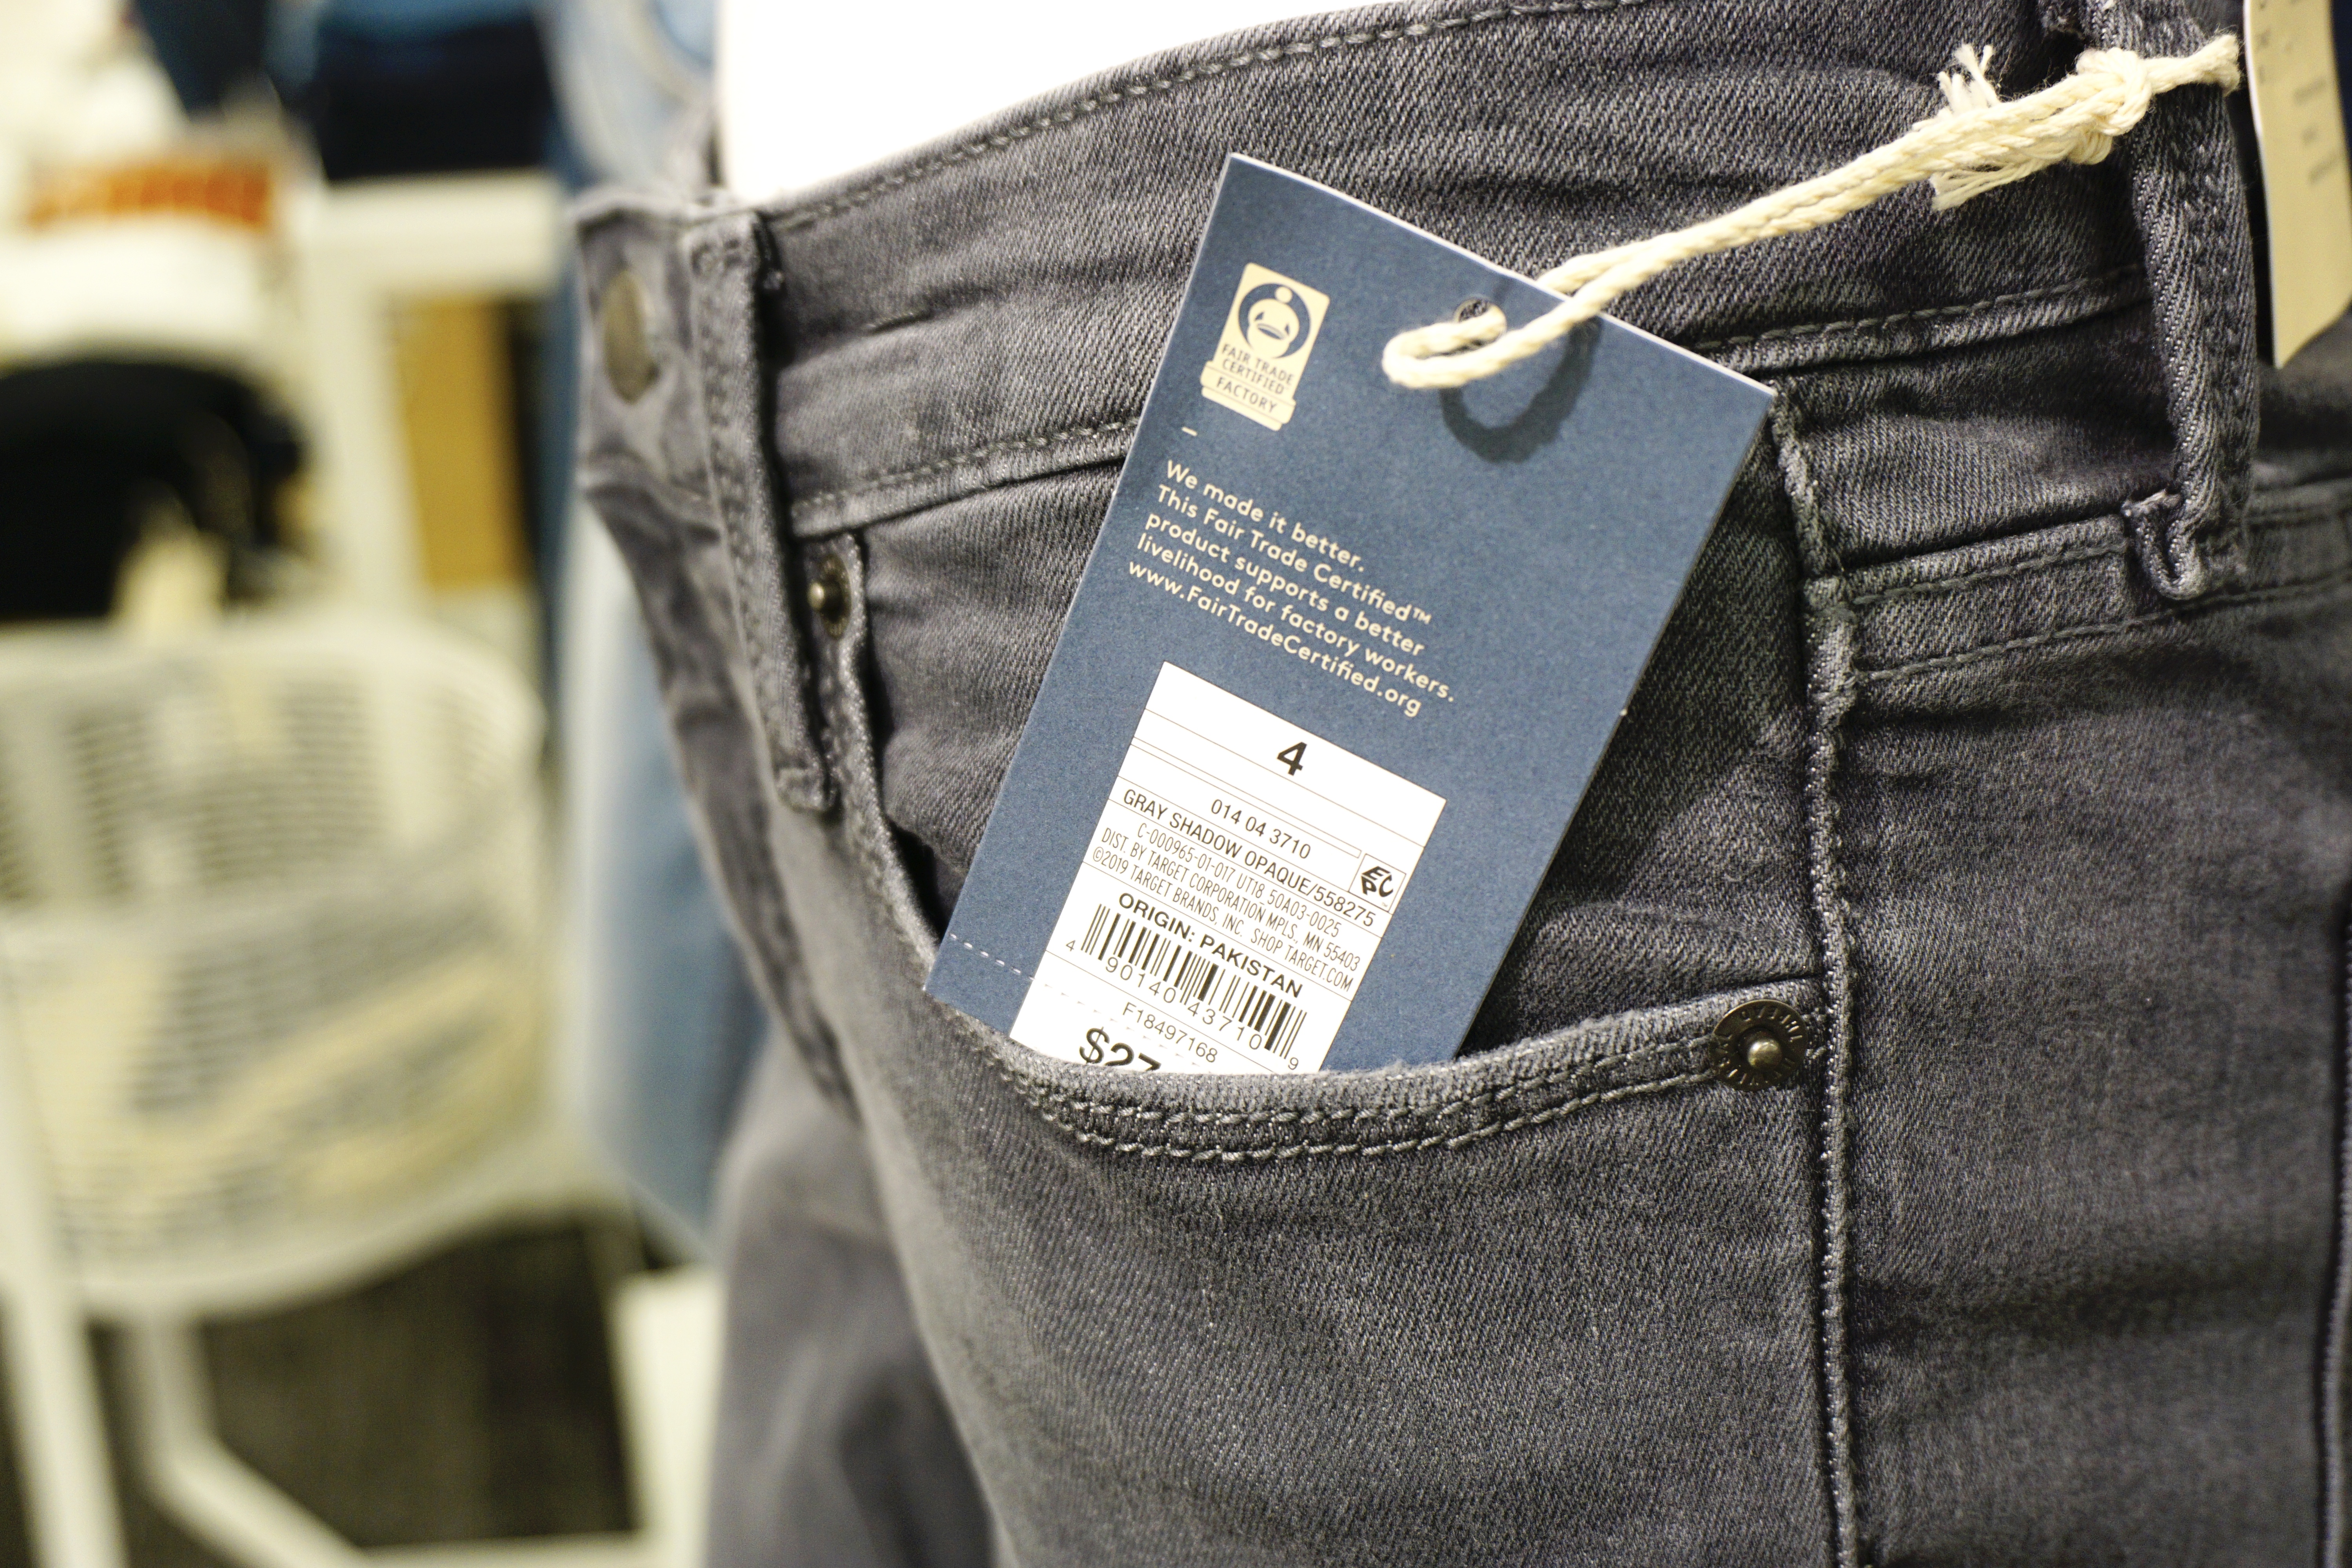 Target’s Fair Trade Denim: Does It Live Up to the Hype?